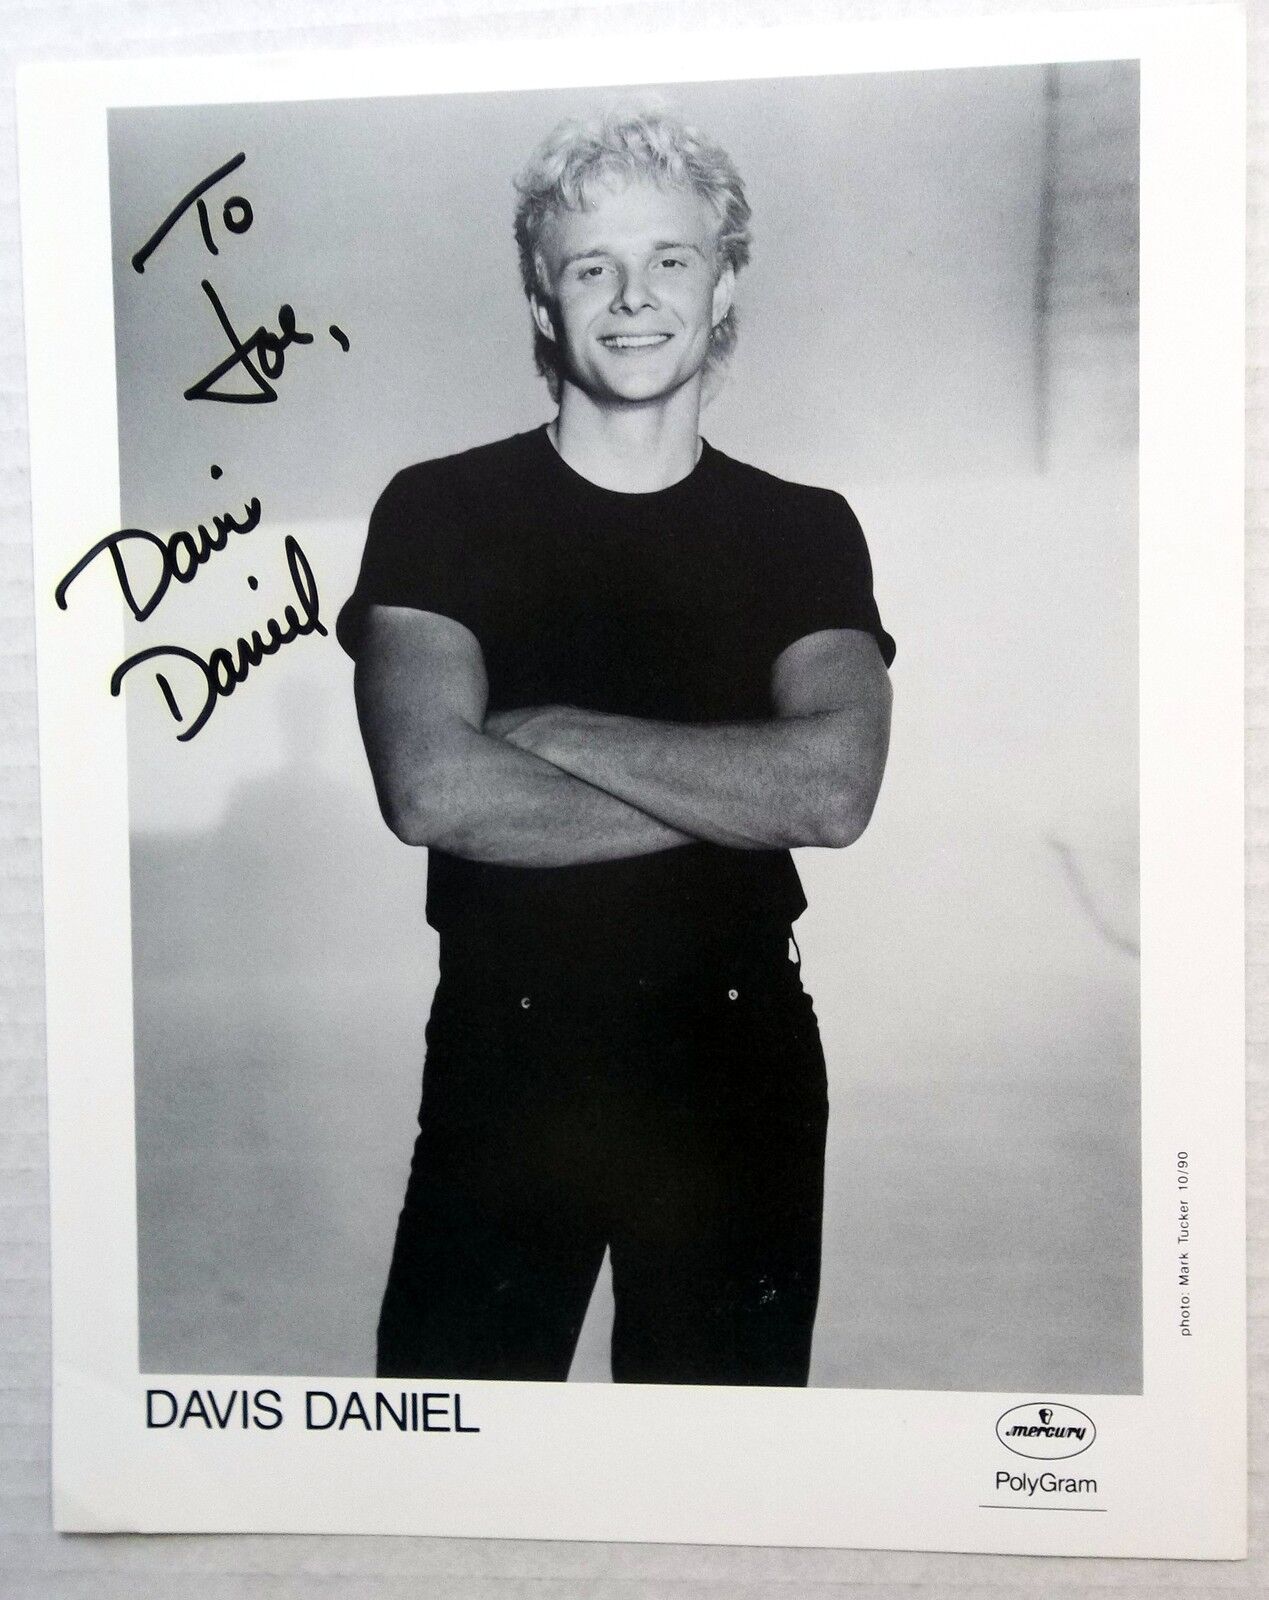 DAVIS DANIEL Autographed B&W 8 x 10 promo Photo Poster painting 90's COUNTRY western SINGER